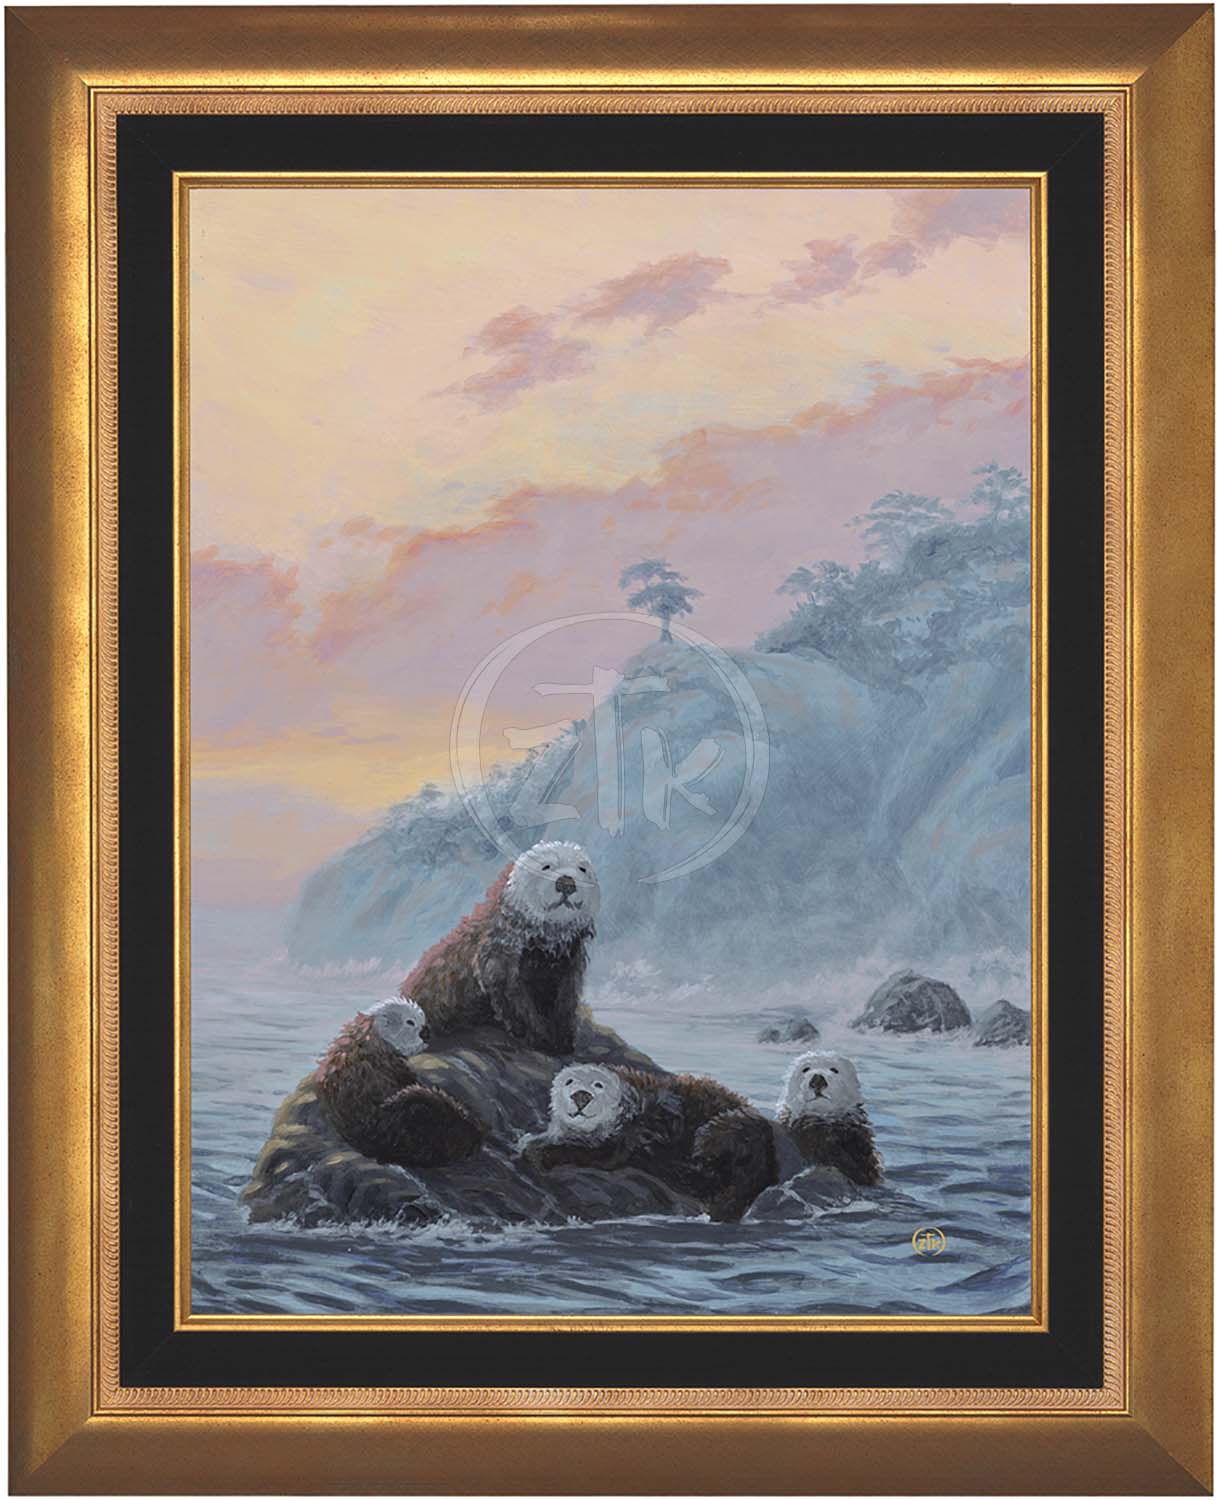 Rockin' Otters - Limited Edition Canvas